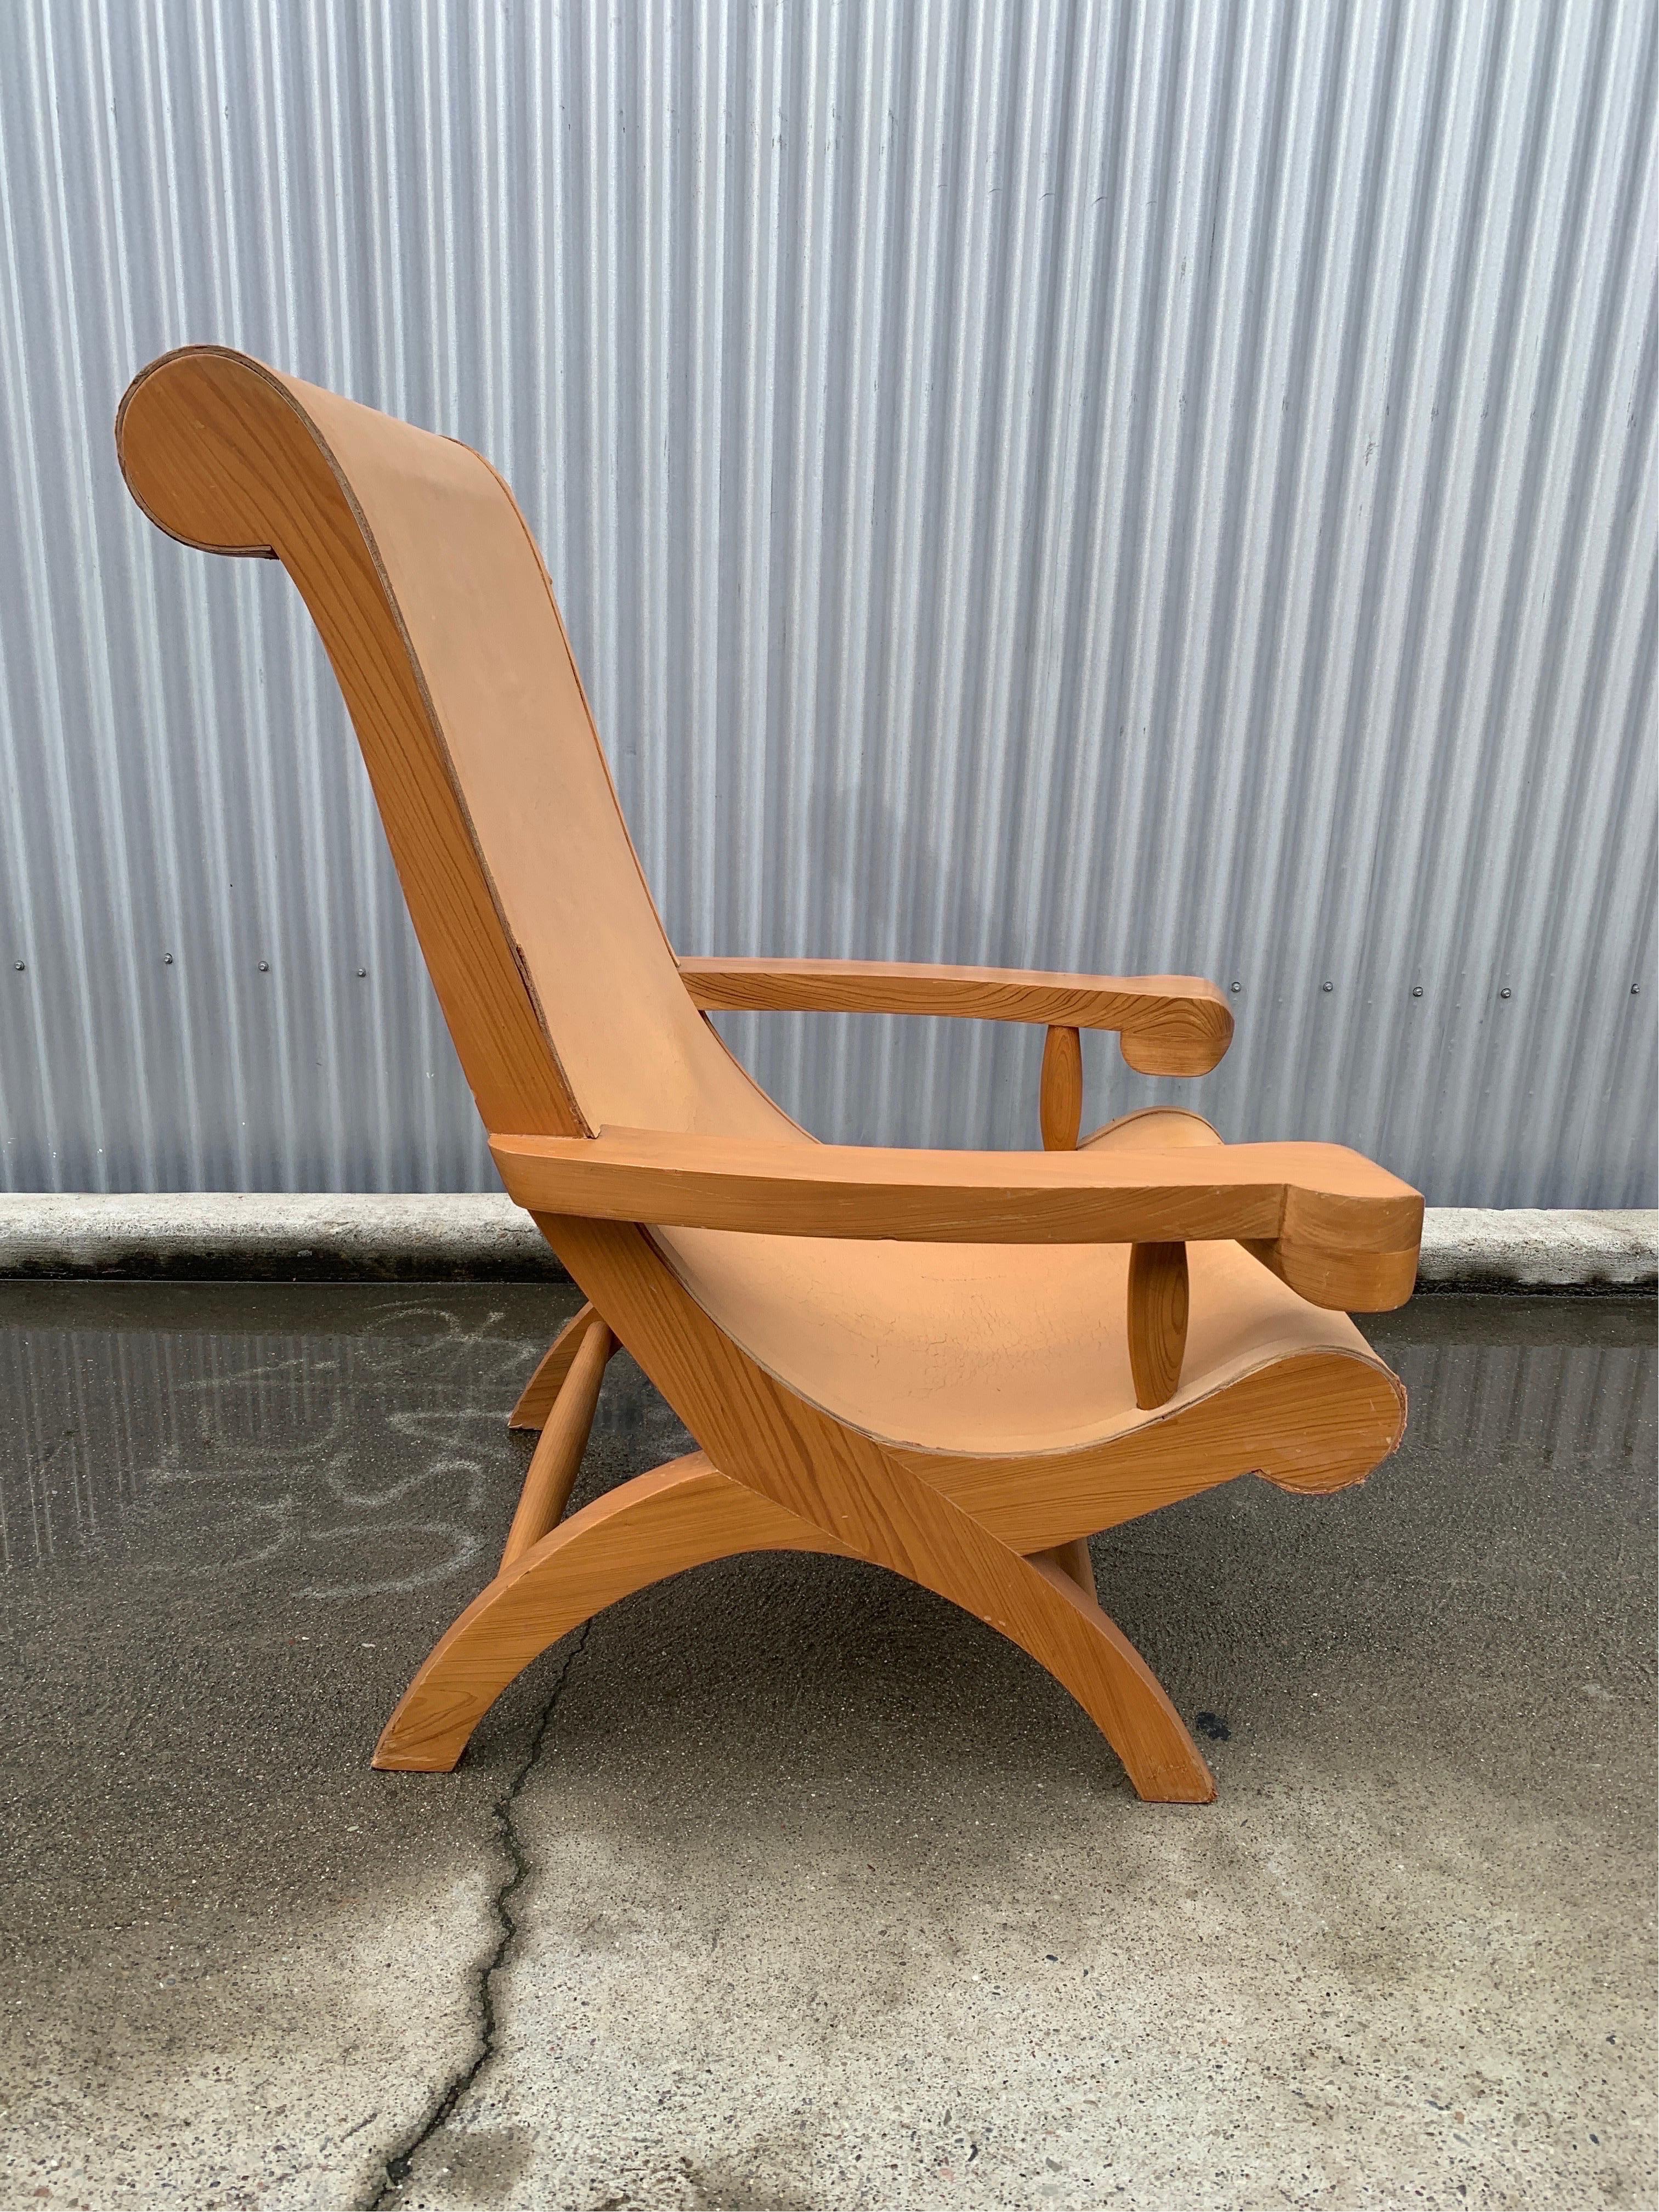 Clara Porset Lounge Chairs For Sale 3